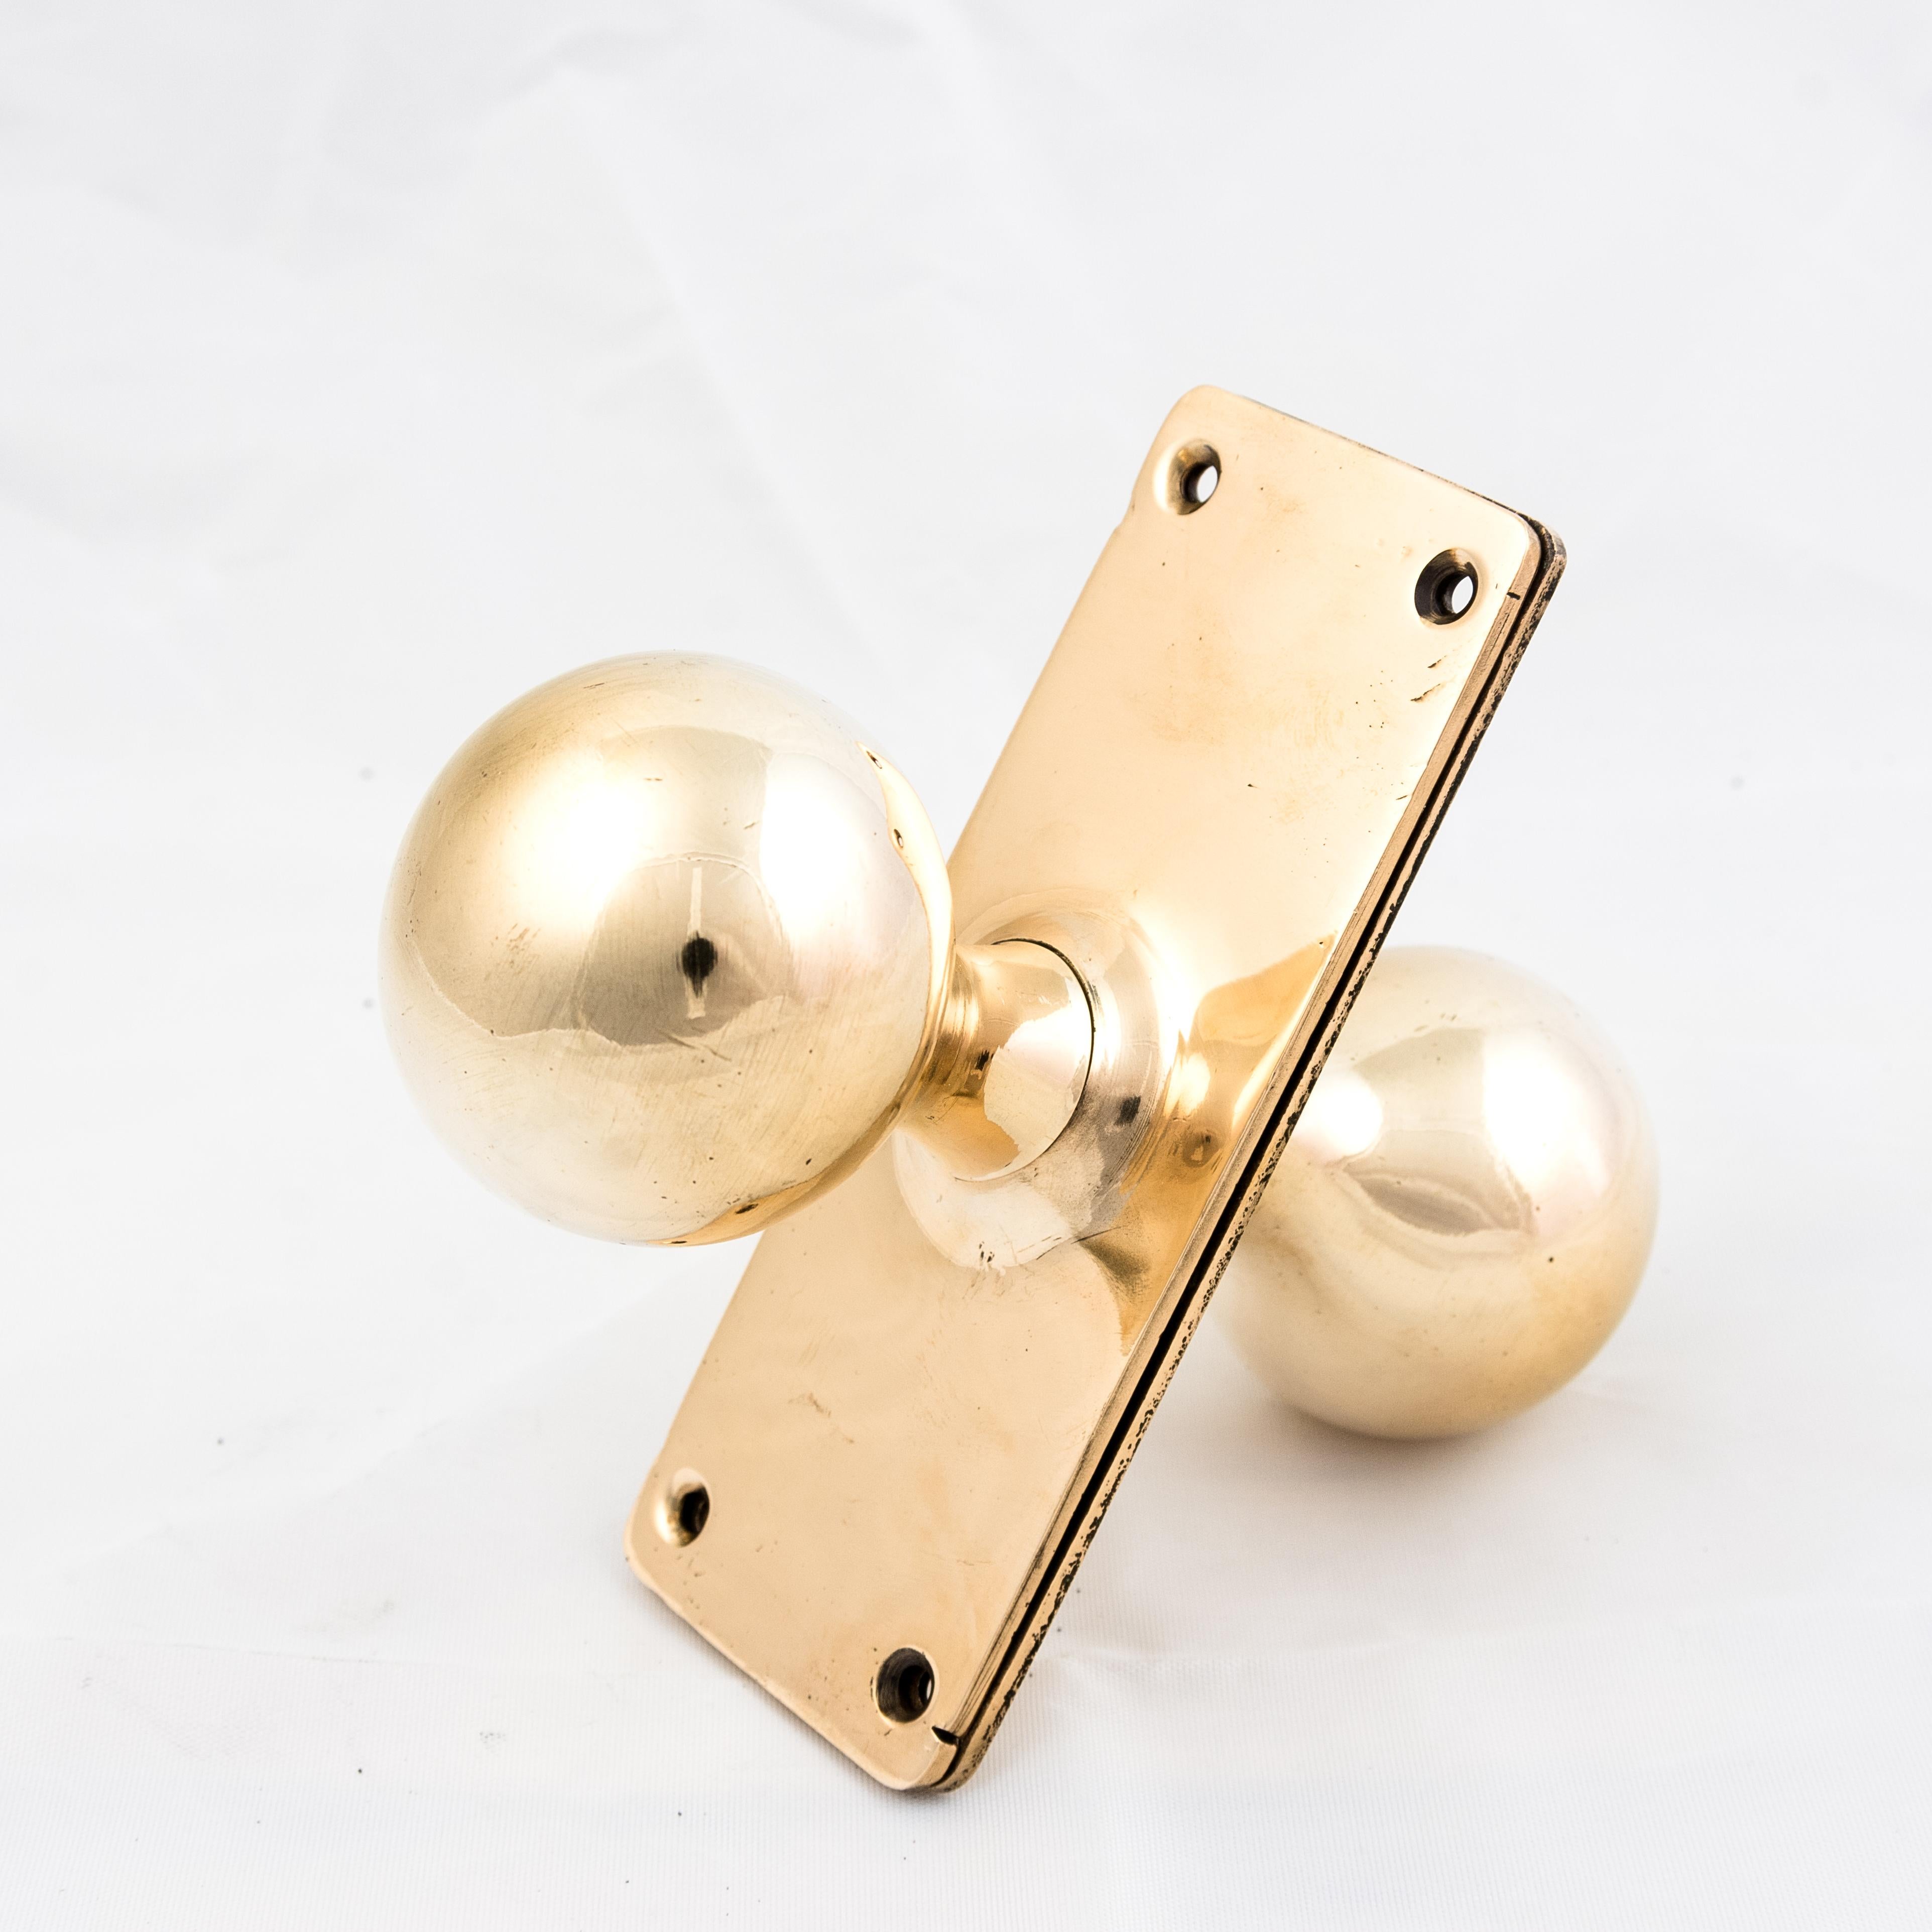 1920s rose brass door knobs, on rectangular backplates.
In perfect working order and ready to use.